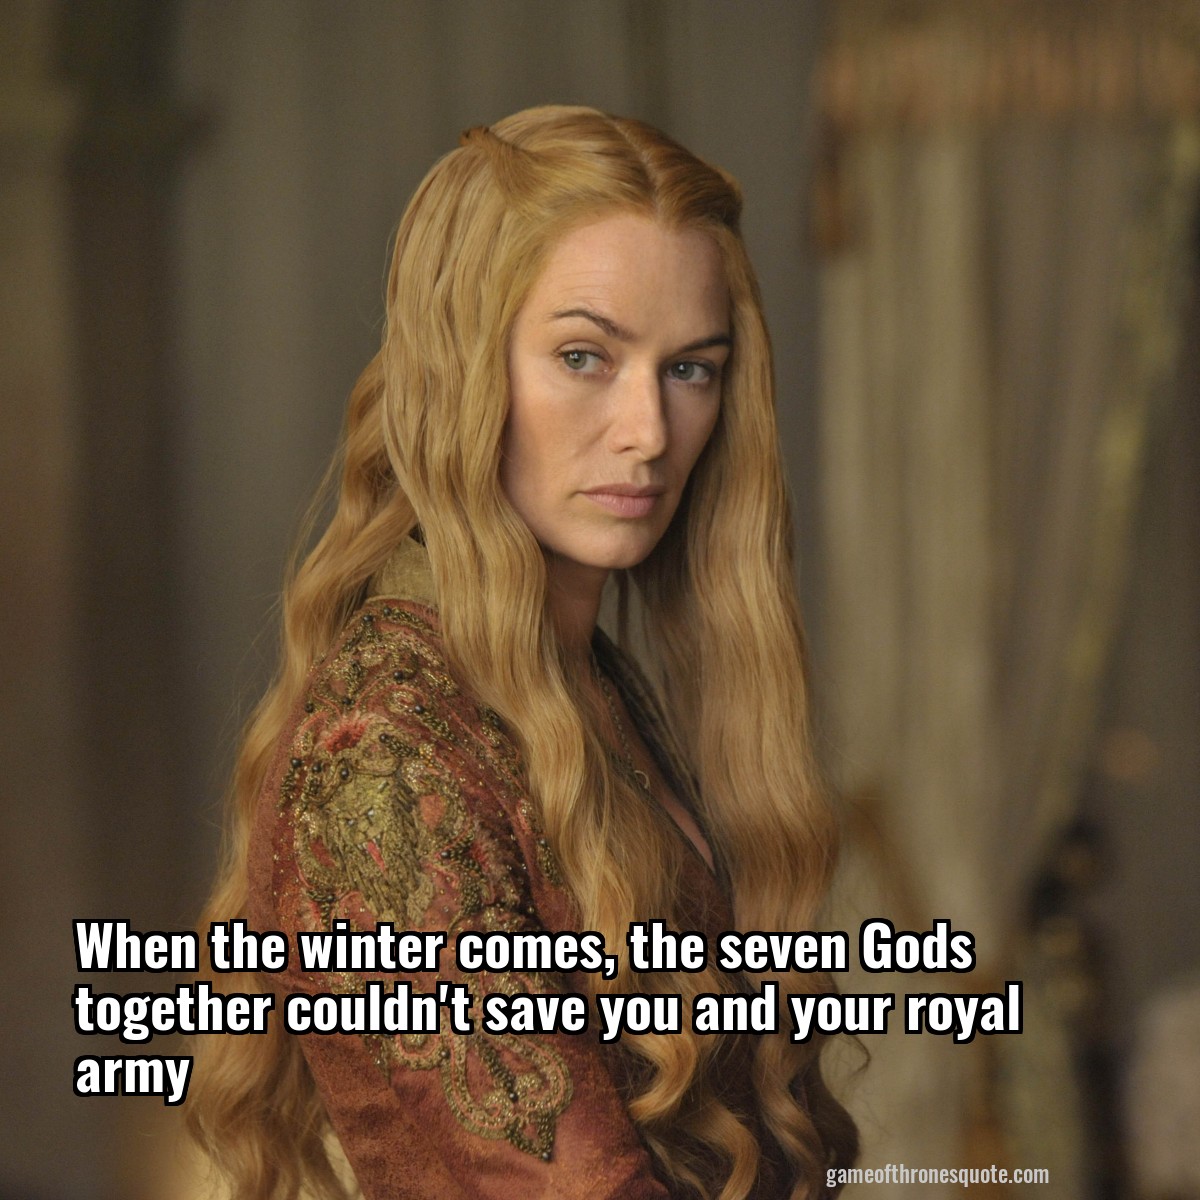 When the winter comes, the seven Gods together couldn't save you and your royal army